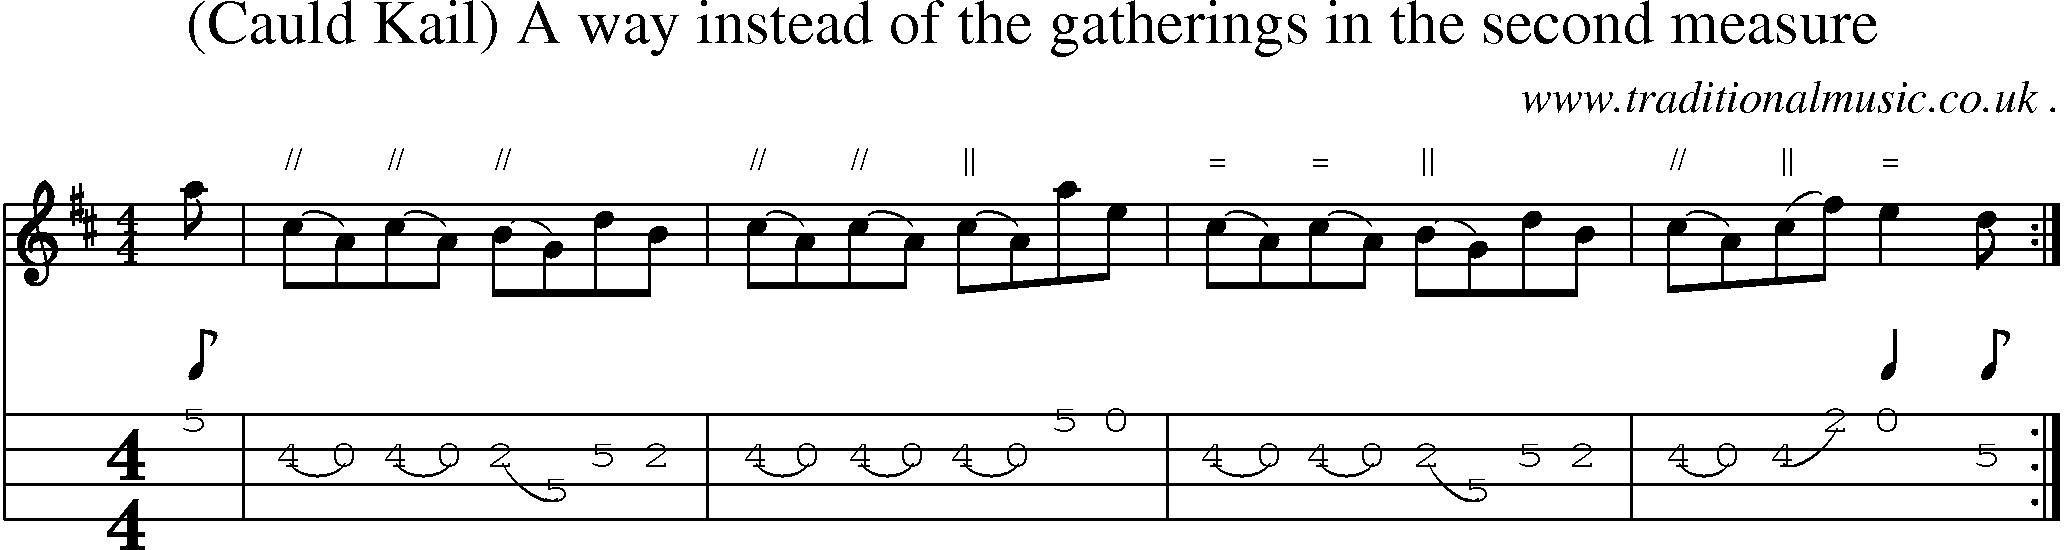 Sheet-music  score, Chords and Mandolin Tabs for Cauld Kail A Way Instead Of The Gatherings In The Second Measure